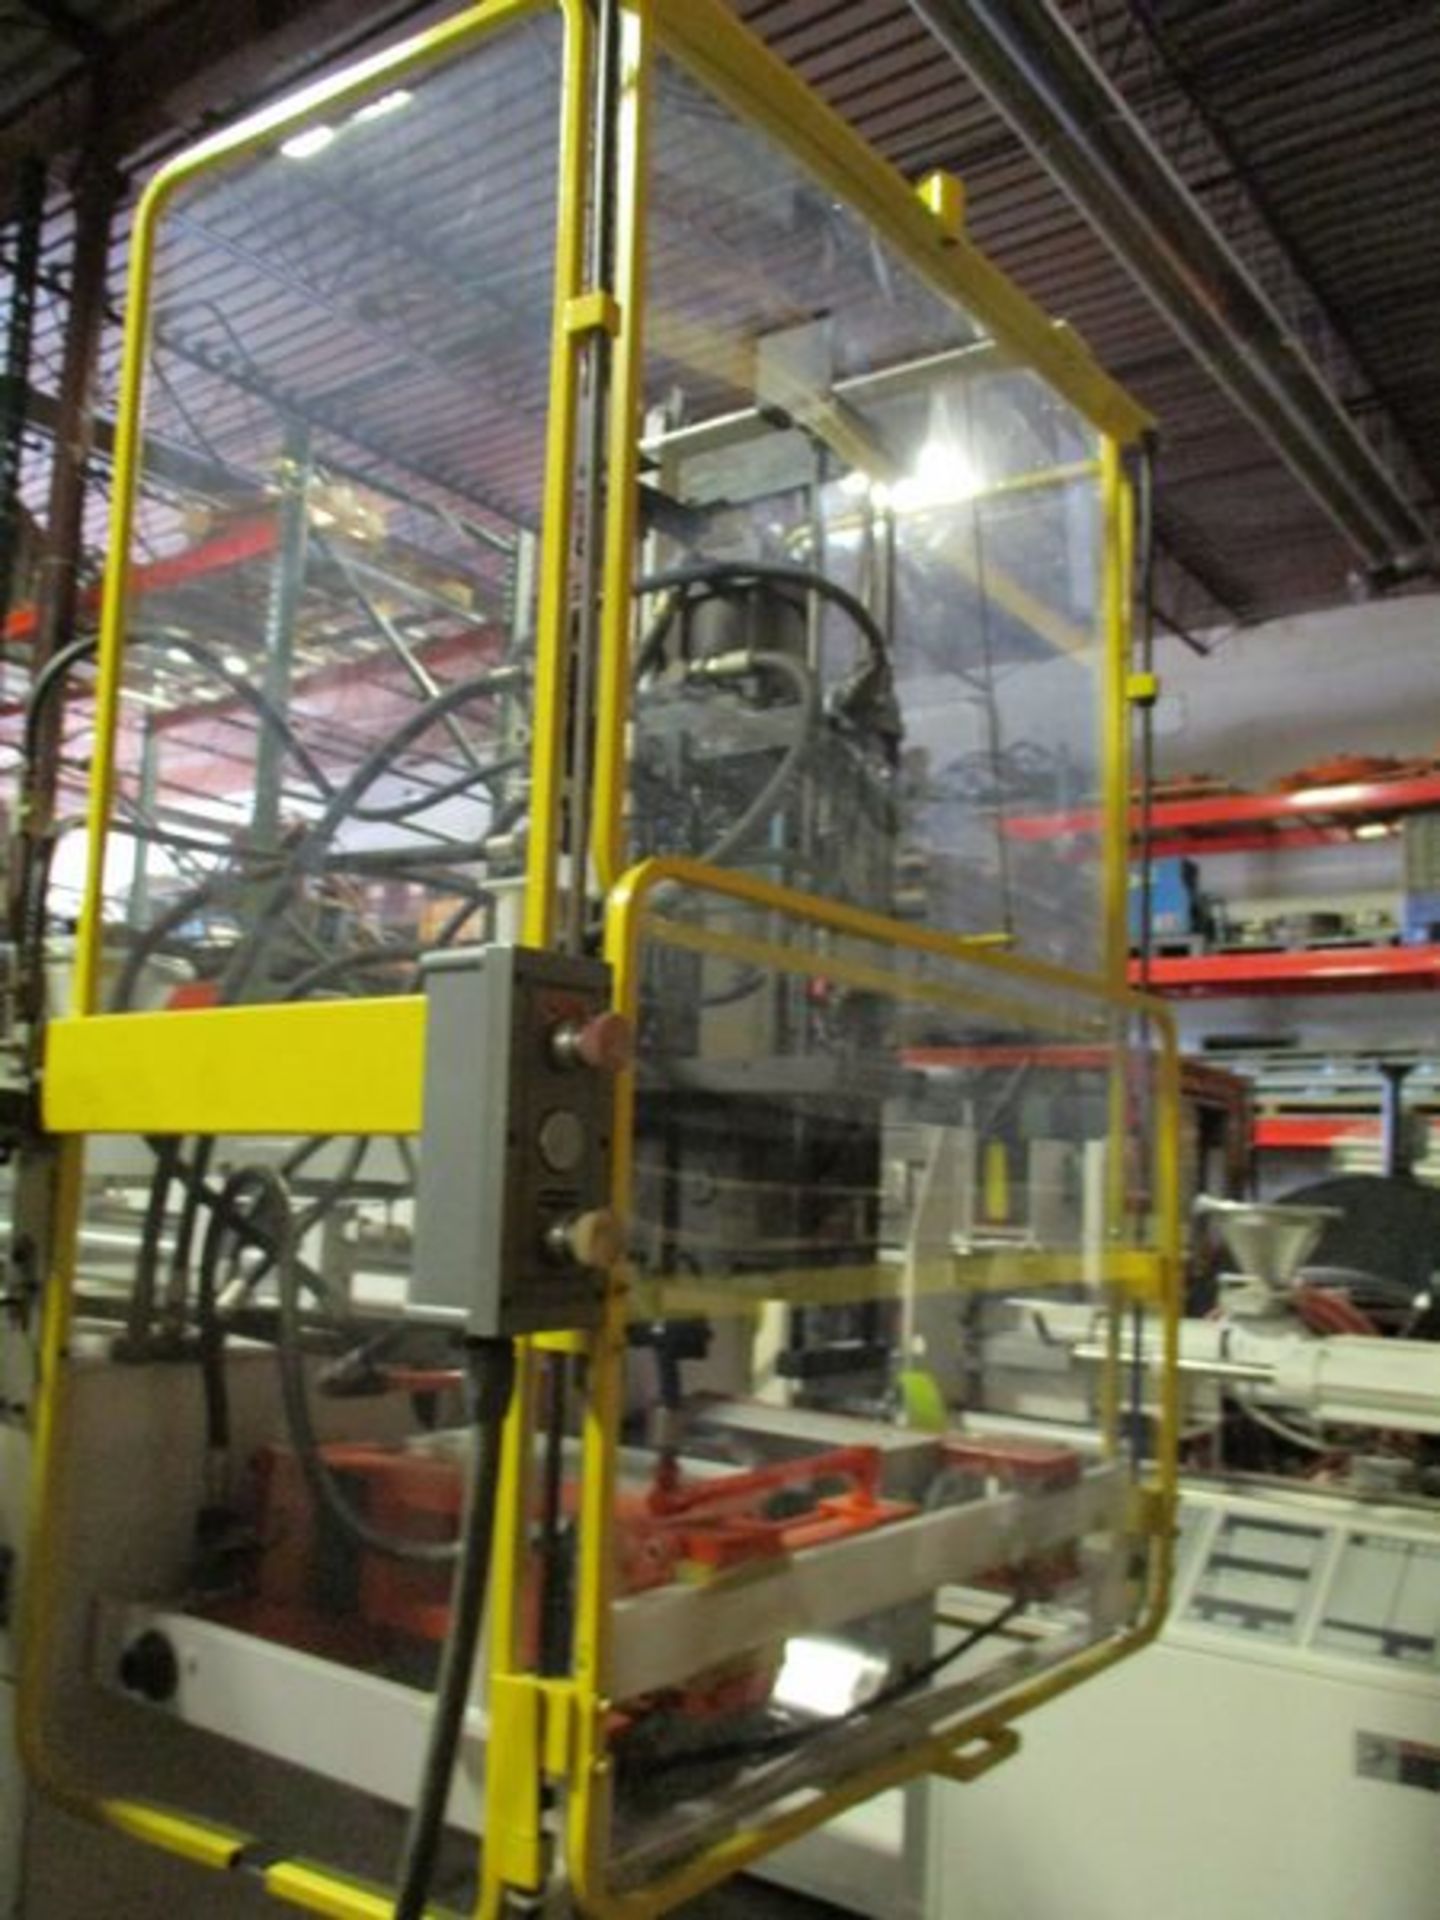 Ingersoll Rand Impco B13 Extrusion Blow Molder - Sterling Heights, MI - Image 12 of 12